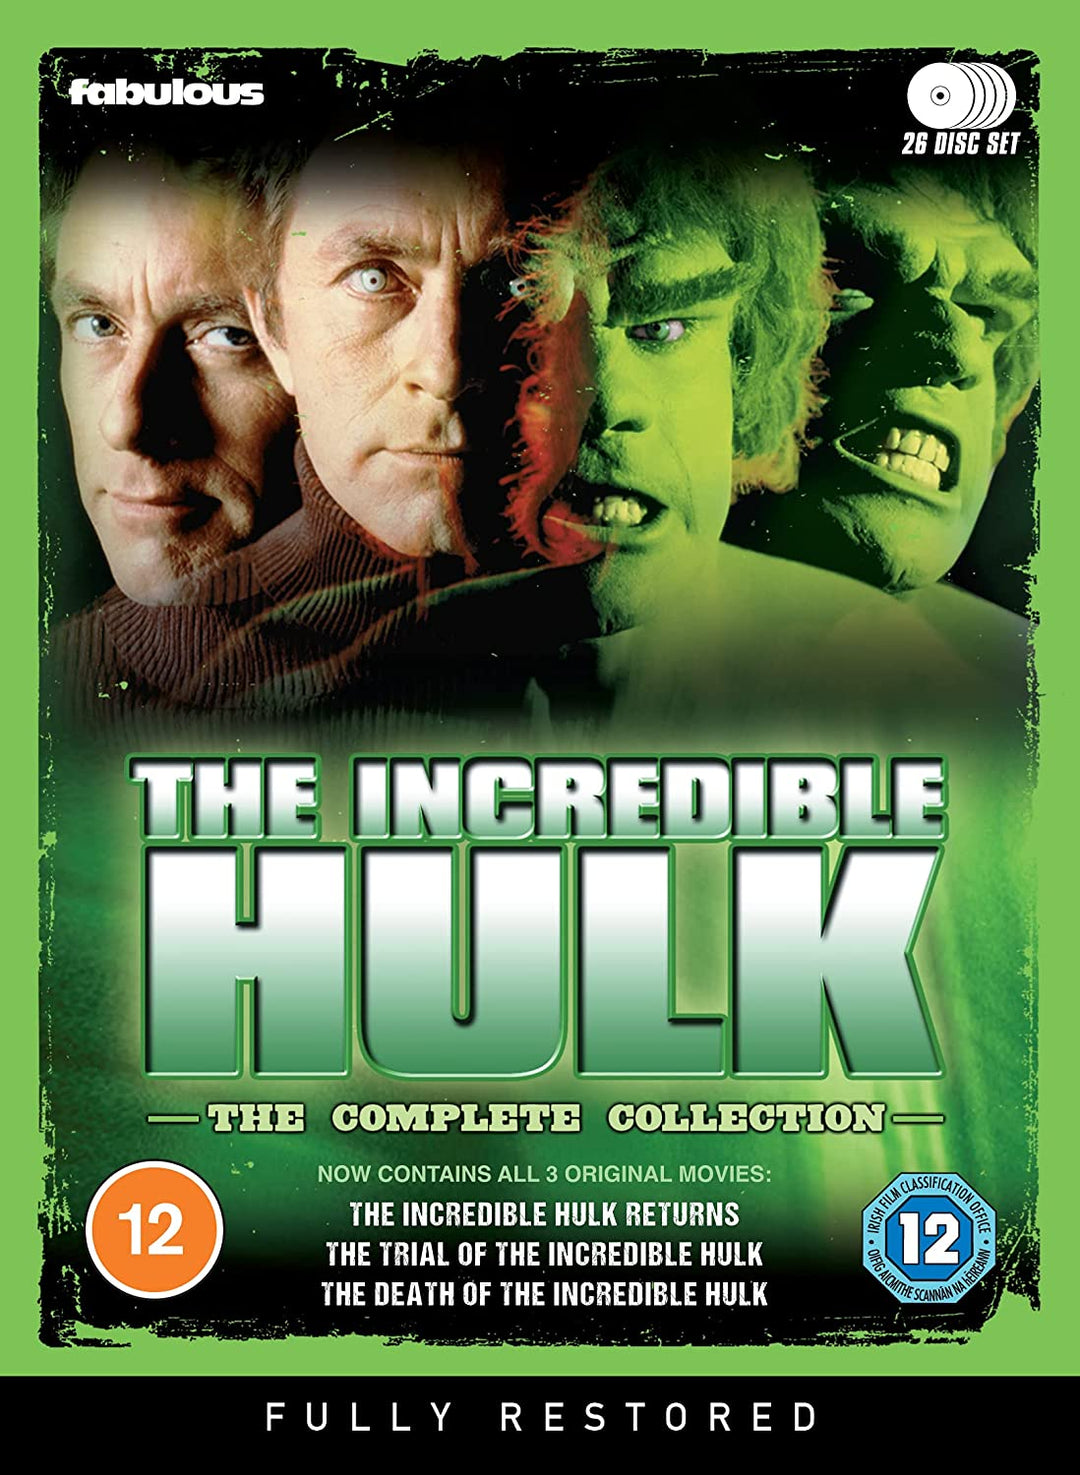 The Incredible Hulk - The Complete Collection [1977] [DVD]